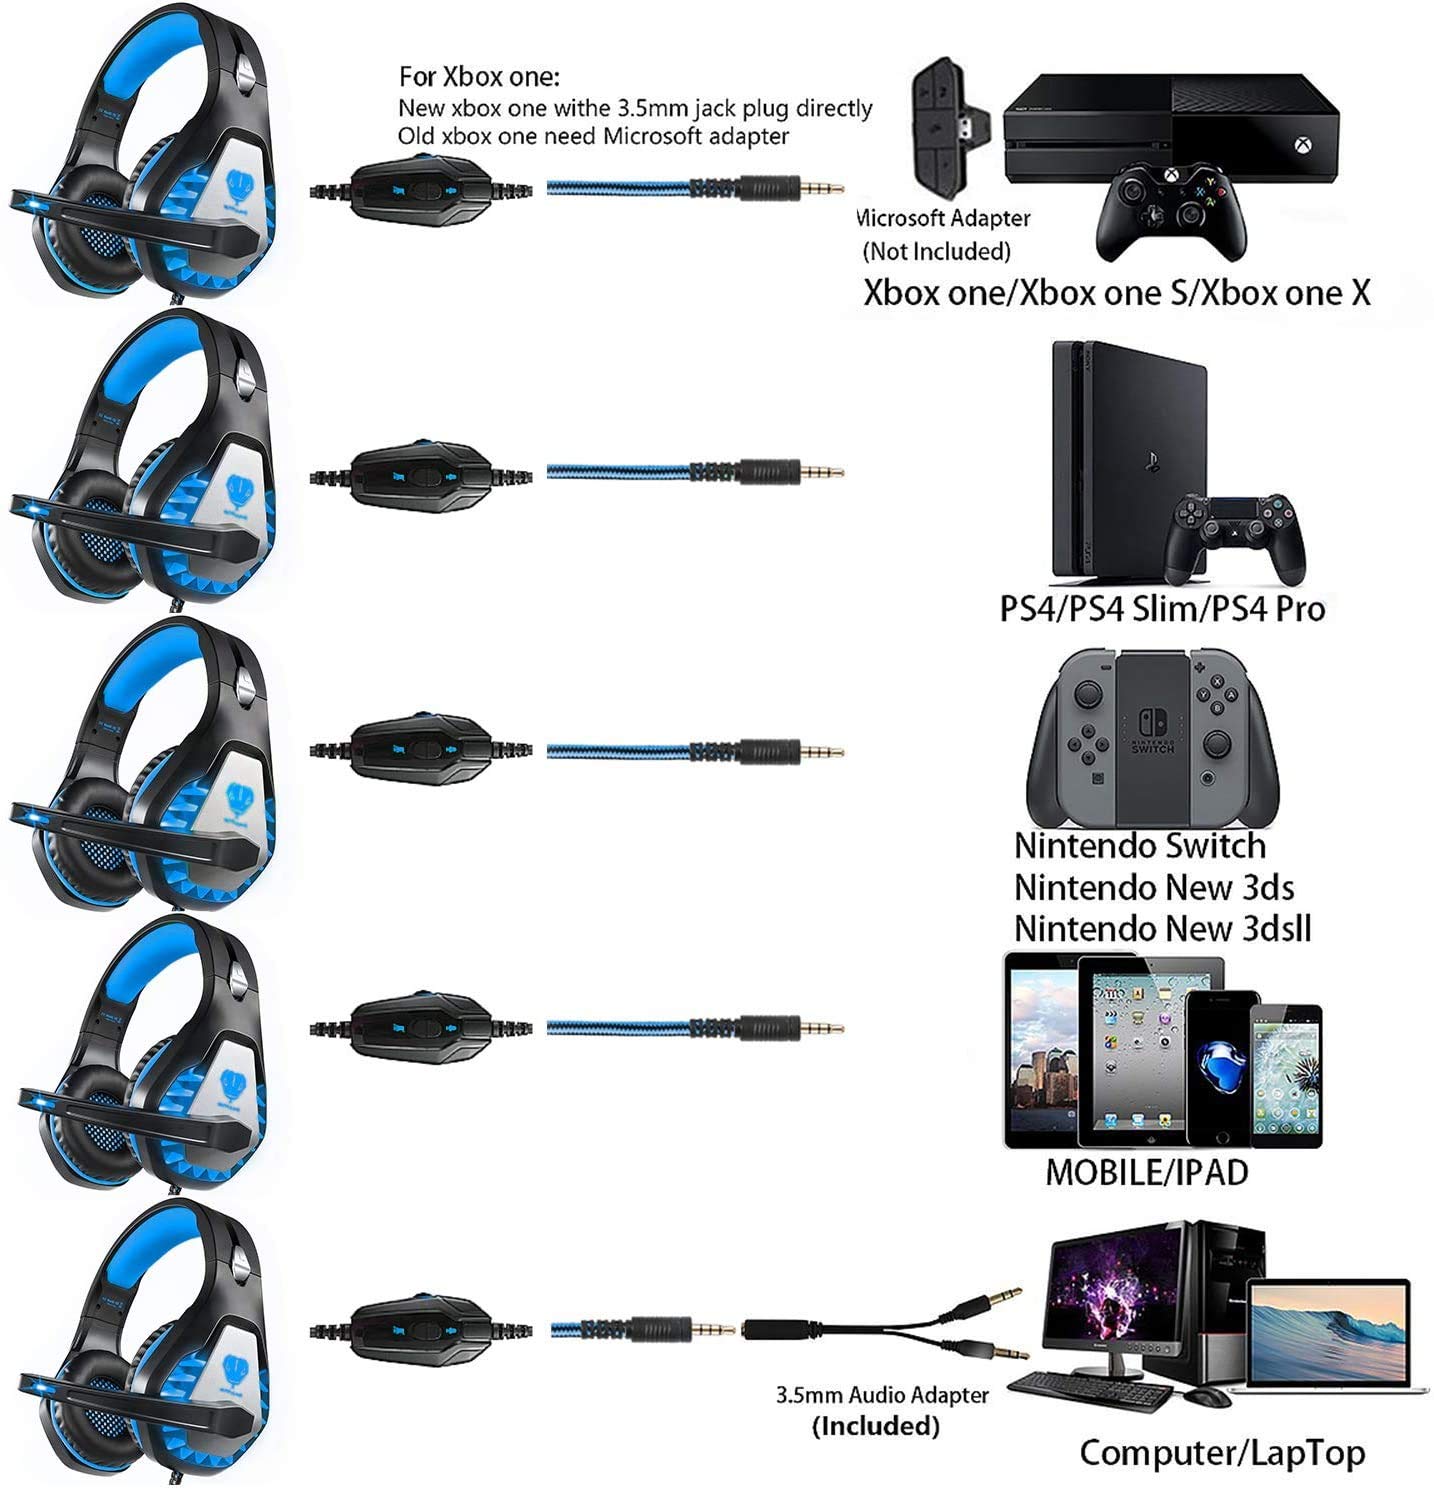 DIWUER Stereo Gaming Headset for Nintendo Switch, PS4, Xbox One with Noise Cancelling Mic, Soft Earmuffs Surround Sound Over Ear Headphones with LED Light for PC, Mac, Laptop (Blue)